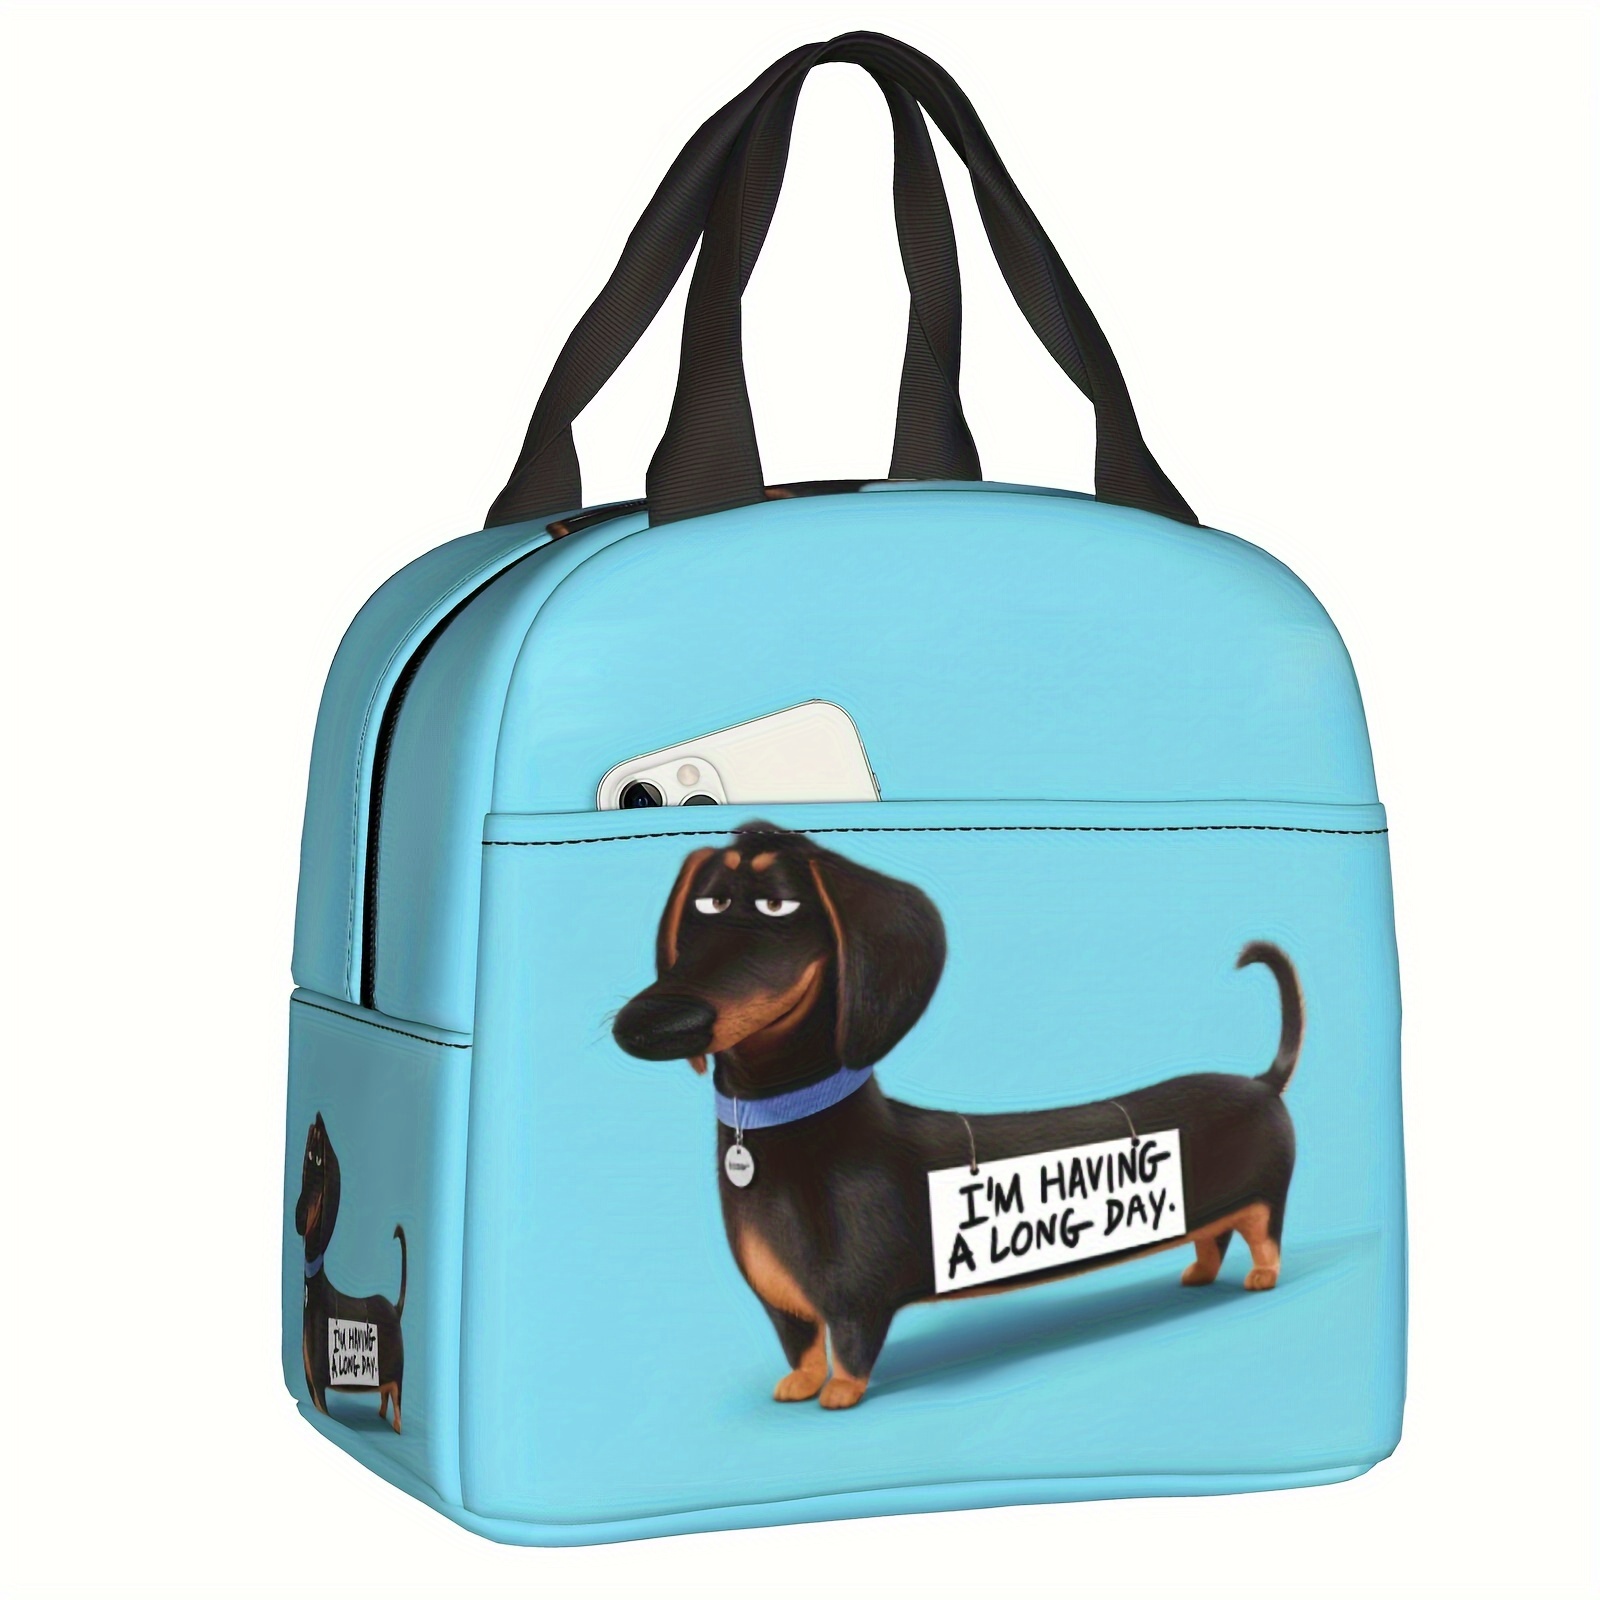 

Dachshund-themed Insulated Lunch Bag - Portable & Reusable Oxford Fabric Tote For Work, School, And Travel - Perfect Gift For Dog Lovers